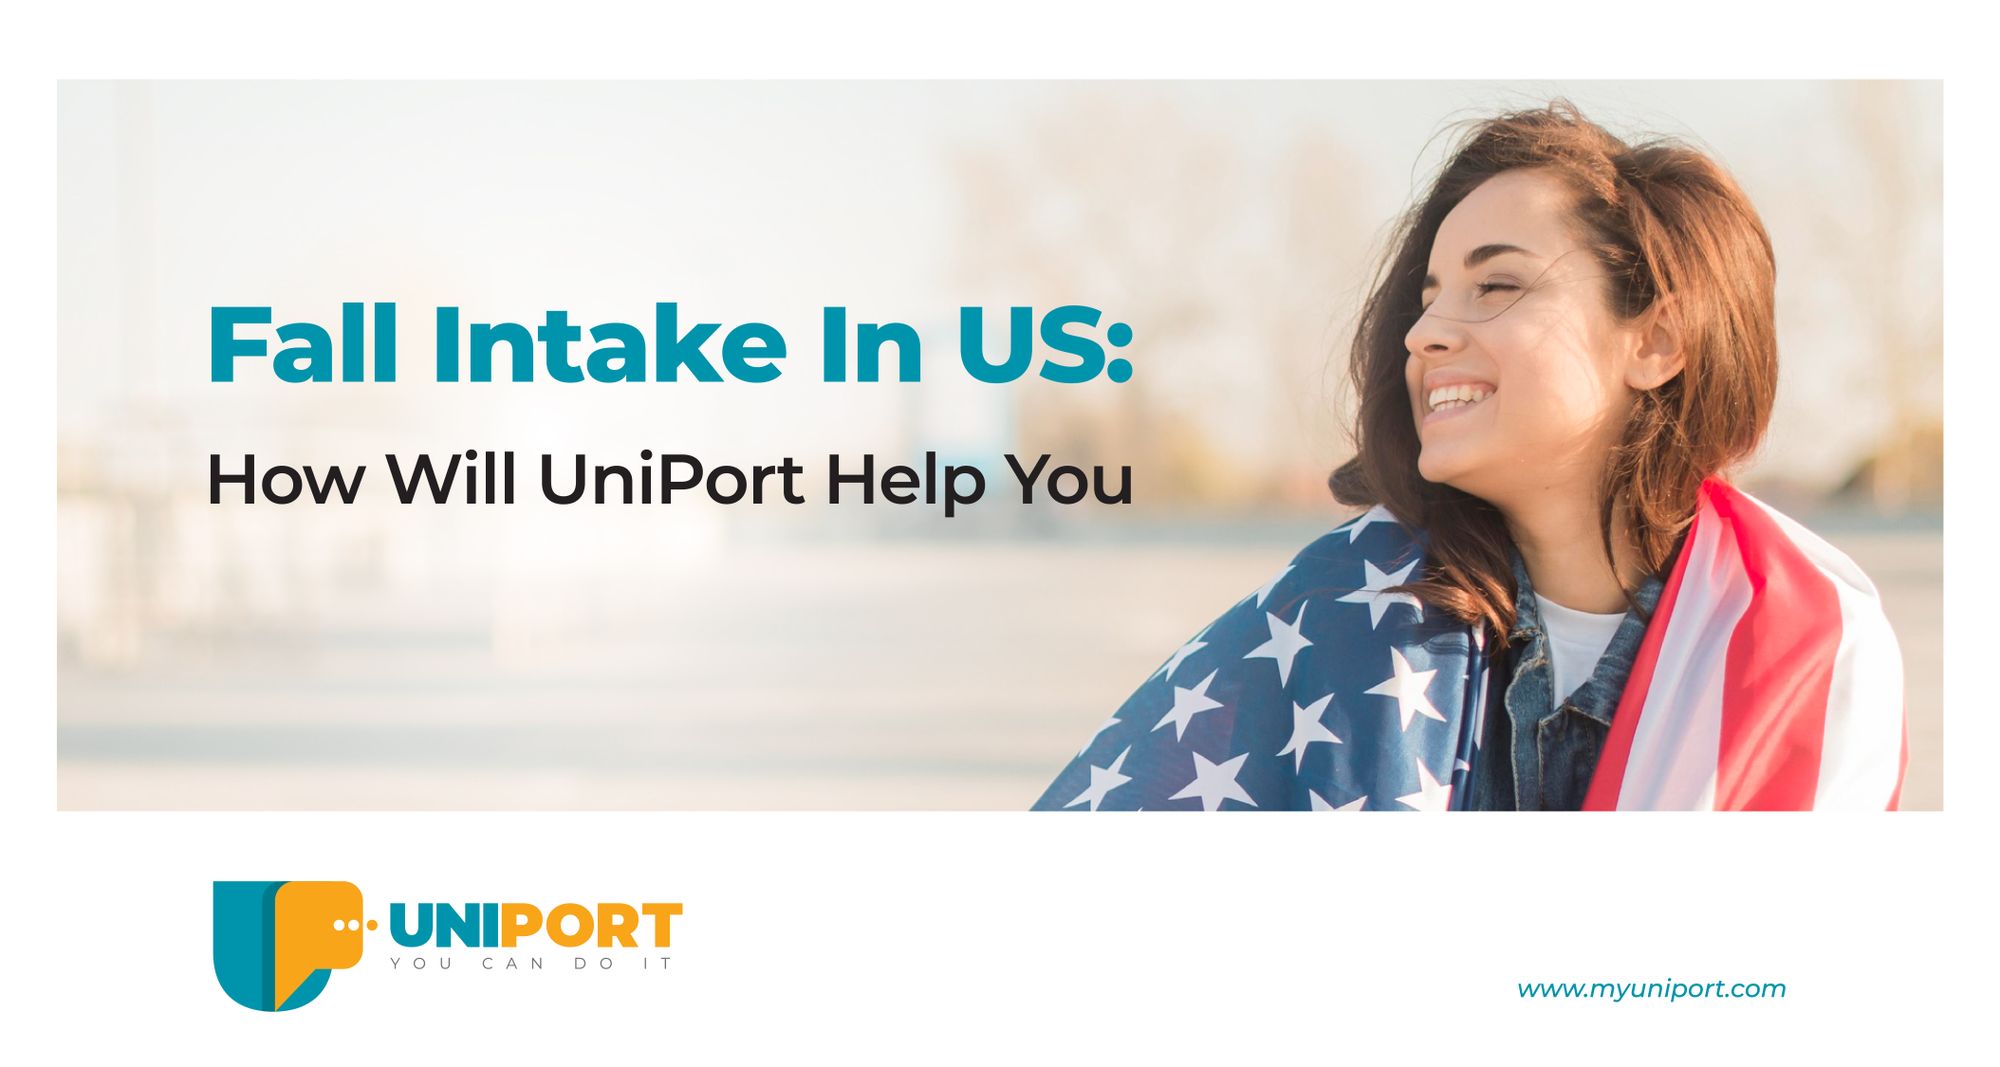 Fall Intake In the US: How Will UniPort Help You?